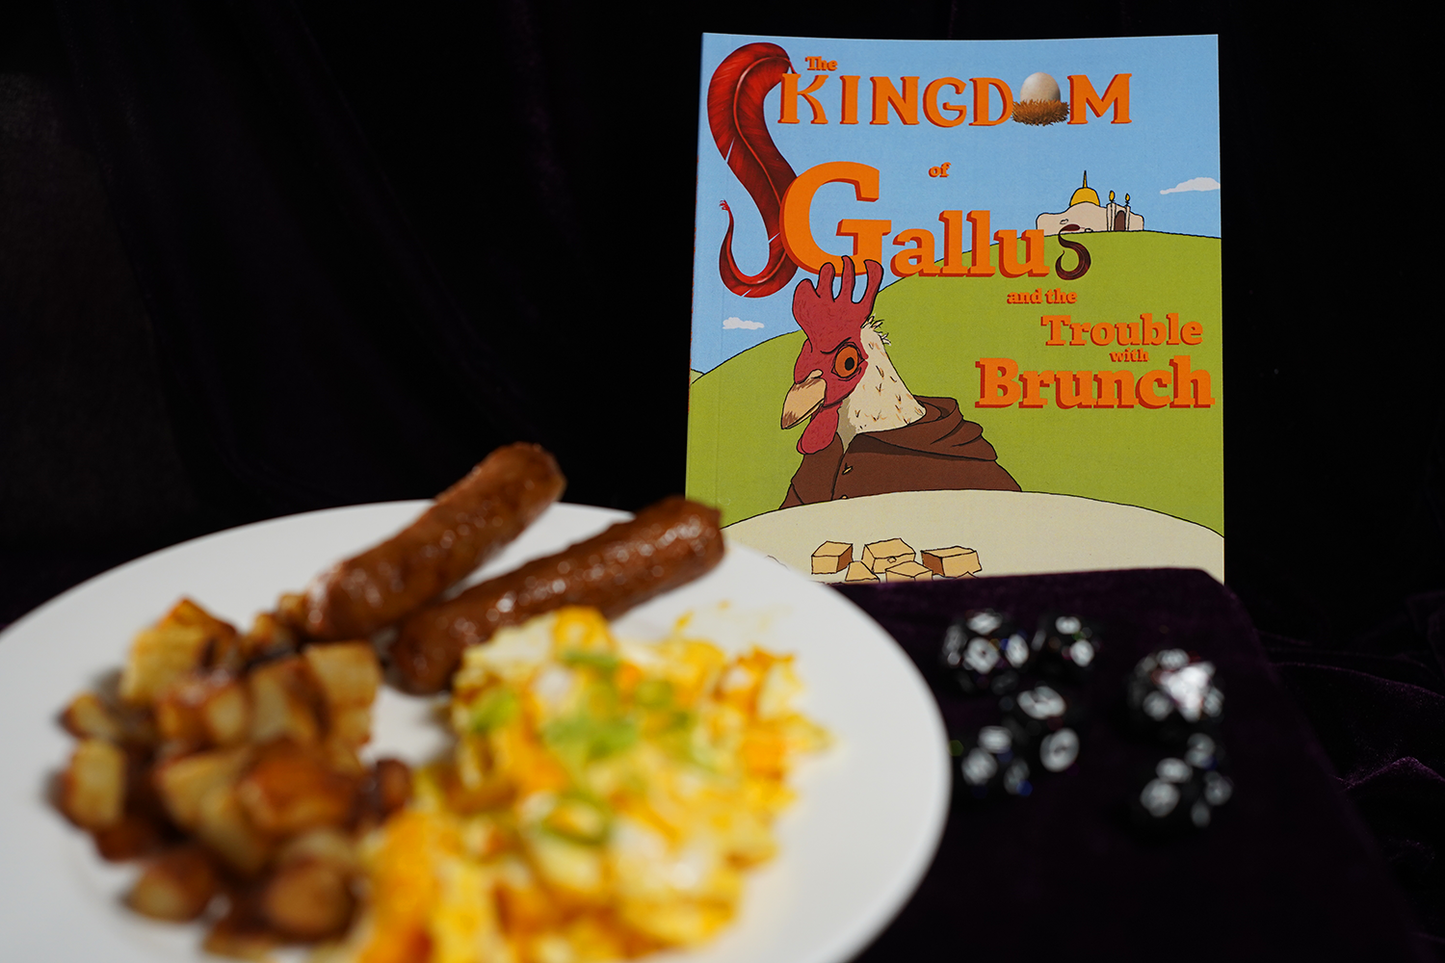 The Kingdom of Gallus and the Trouble with Brunch (Signed)